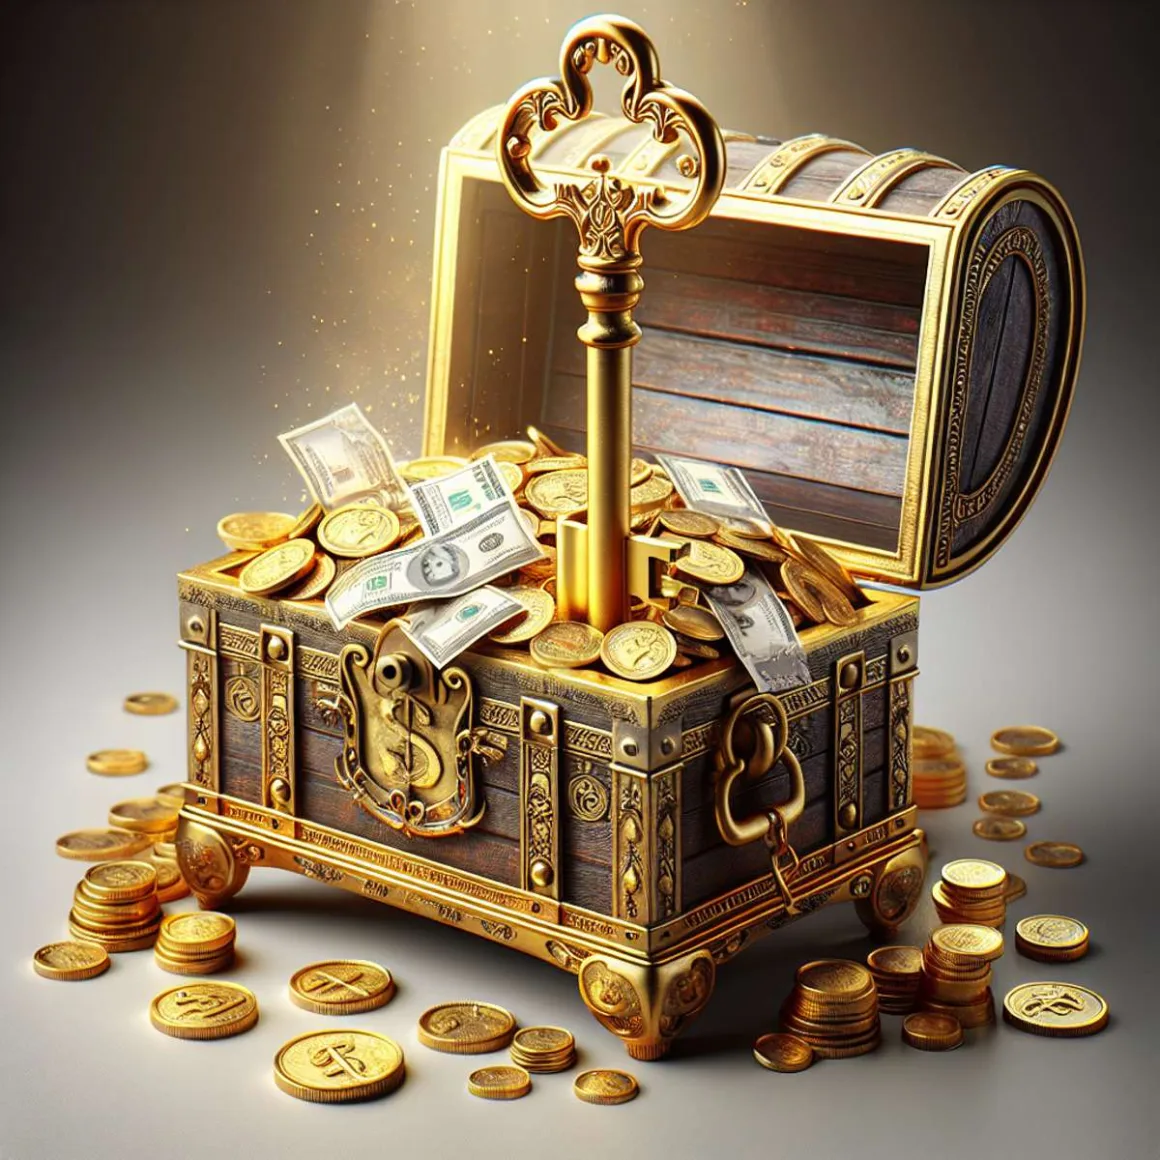 A golden key unlocking a treasure chest filled with coins and banknotes.